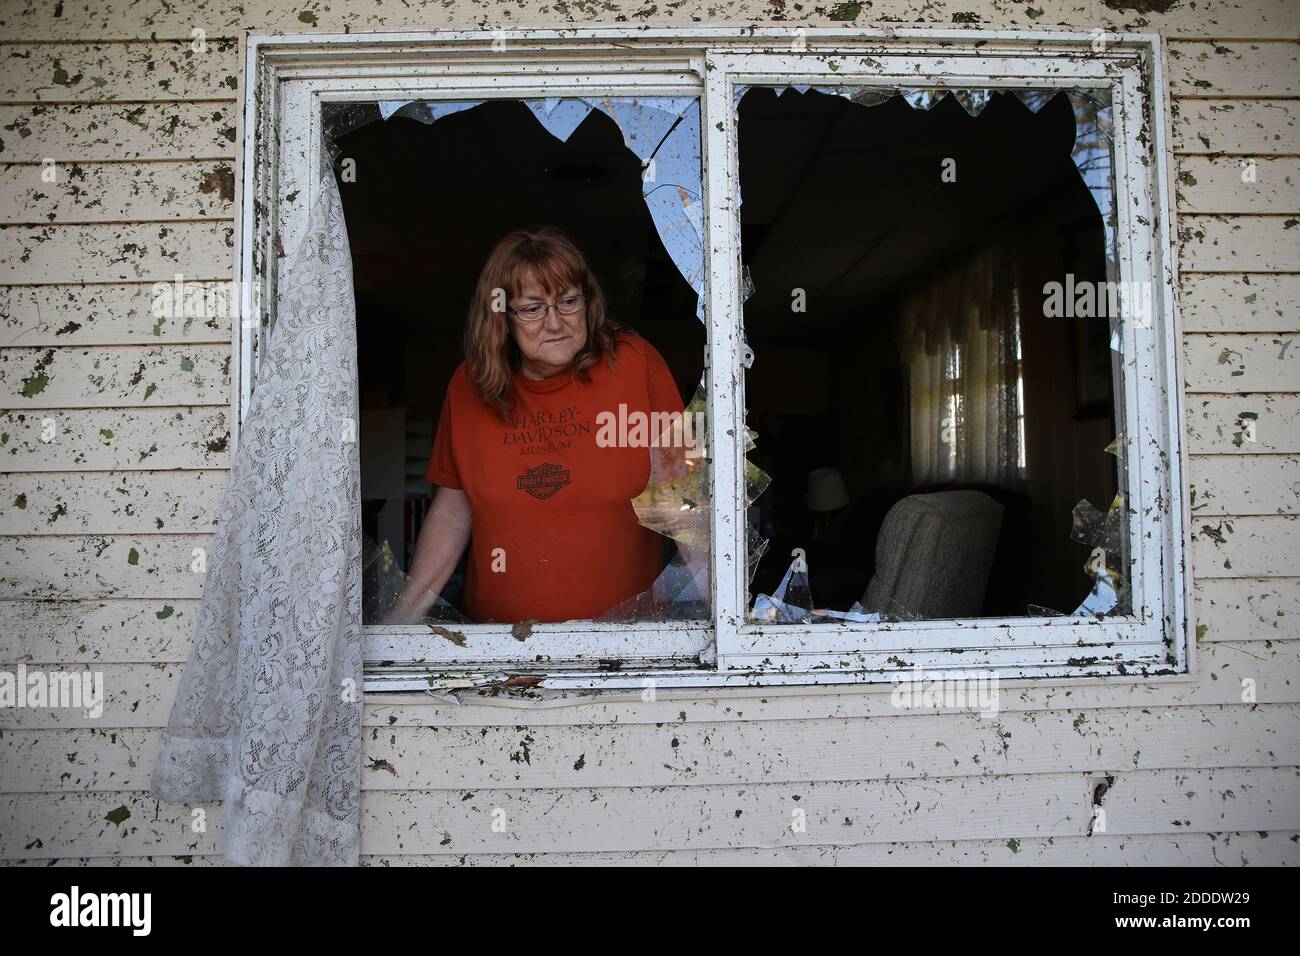 NO FILM, NO VIDEO, NO TV, NO DOCUMENTARY - Linda Maland looks at damage to her neighborhood along Mazon Street in Coal City, IL, USA, on Tuesday, June 23, 2015, the morning after a severe storm tore through the area. Photo by Antonio Perez/Chicago Tribune/TNS/ABACAPRESS.COM Stock Photo